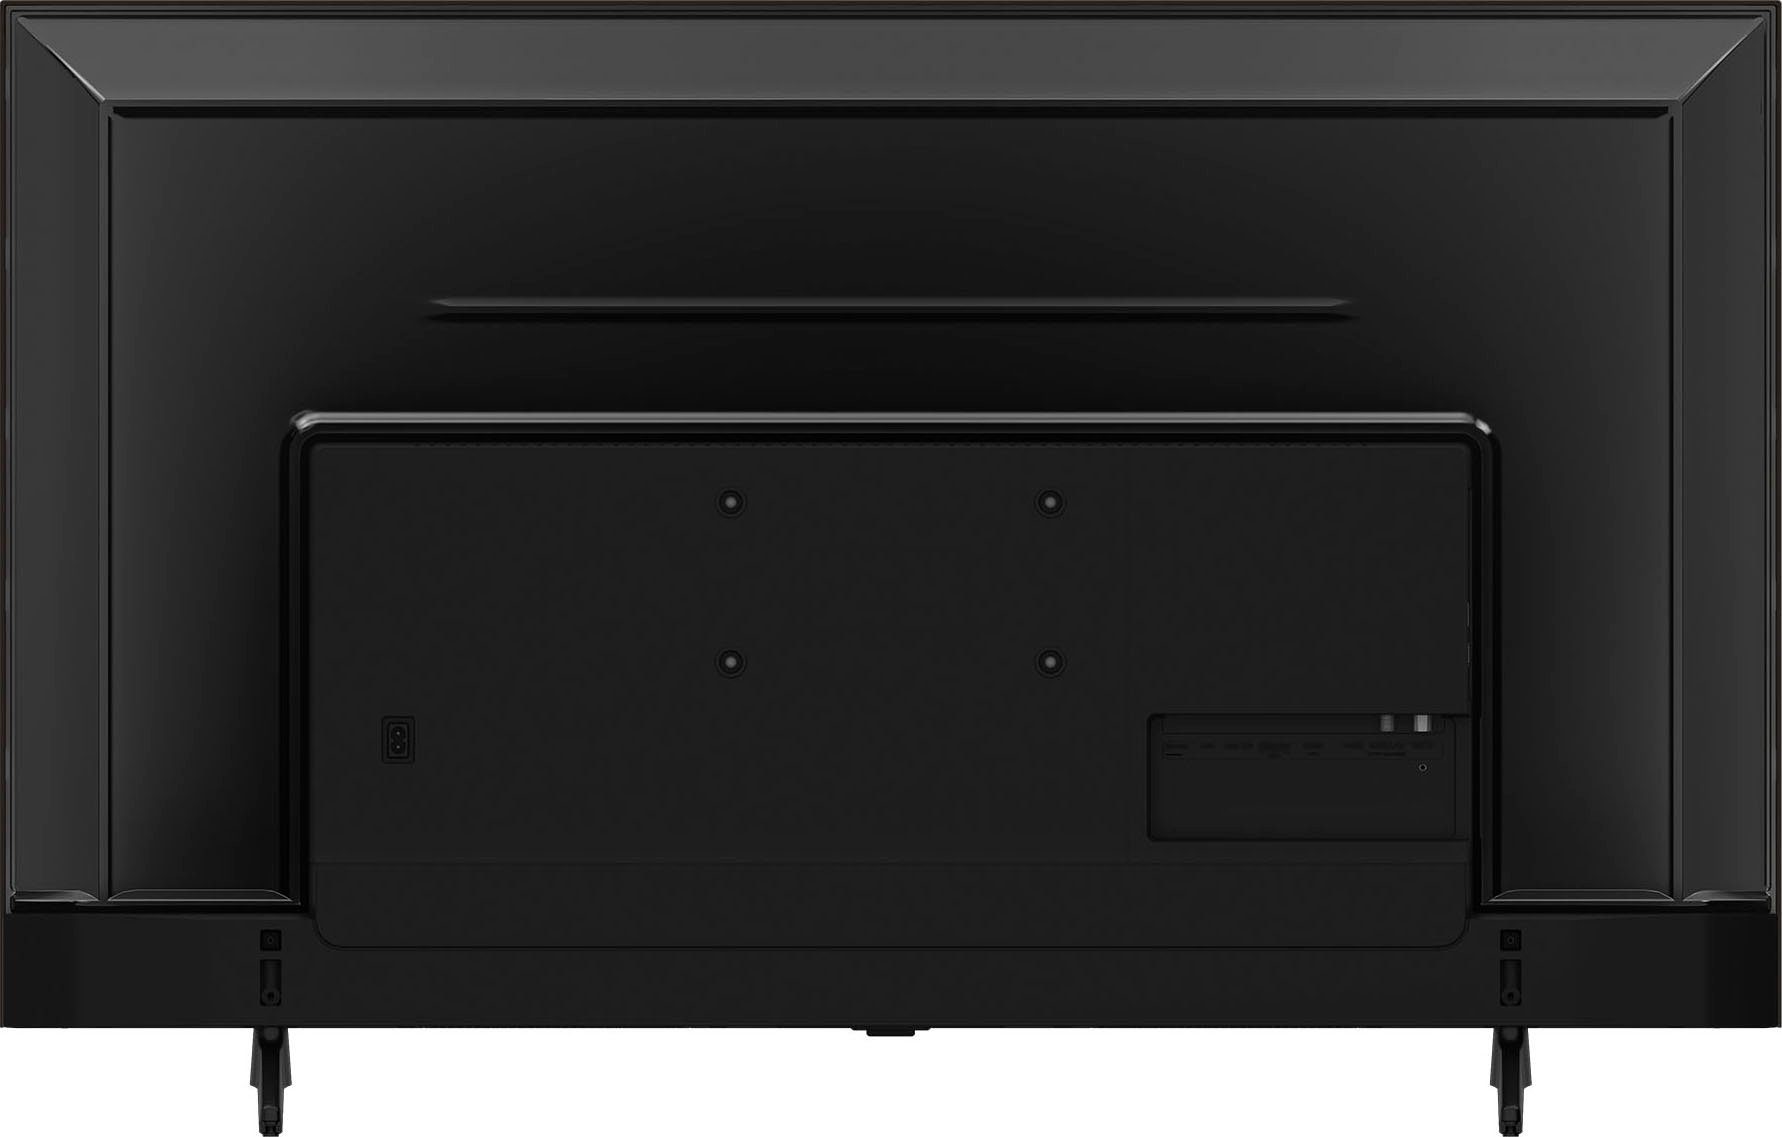 Grundig 75 VOE 73 AU9T00 LED-Fernseher (189 cm/75 Zoll, 4K Ultra HD,  Android TV)